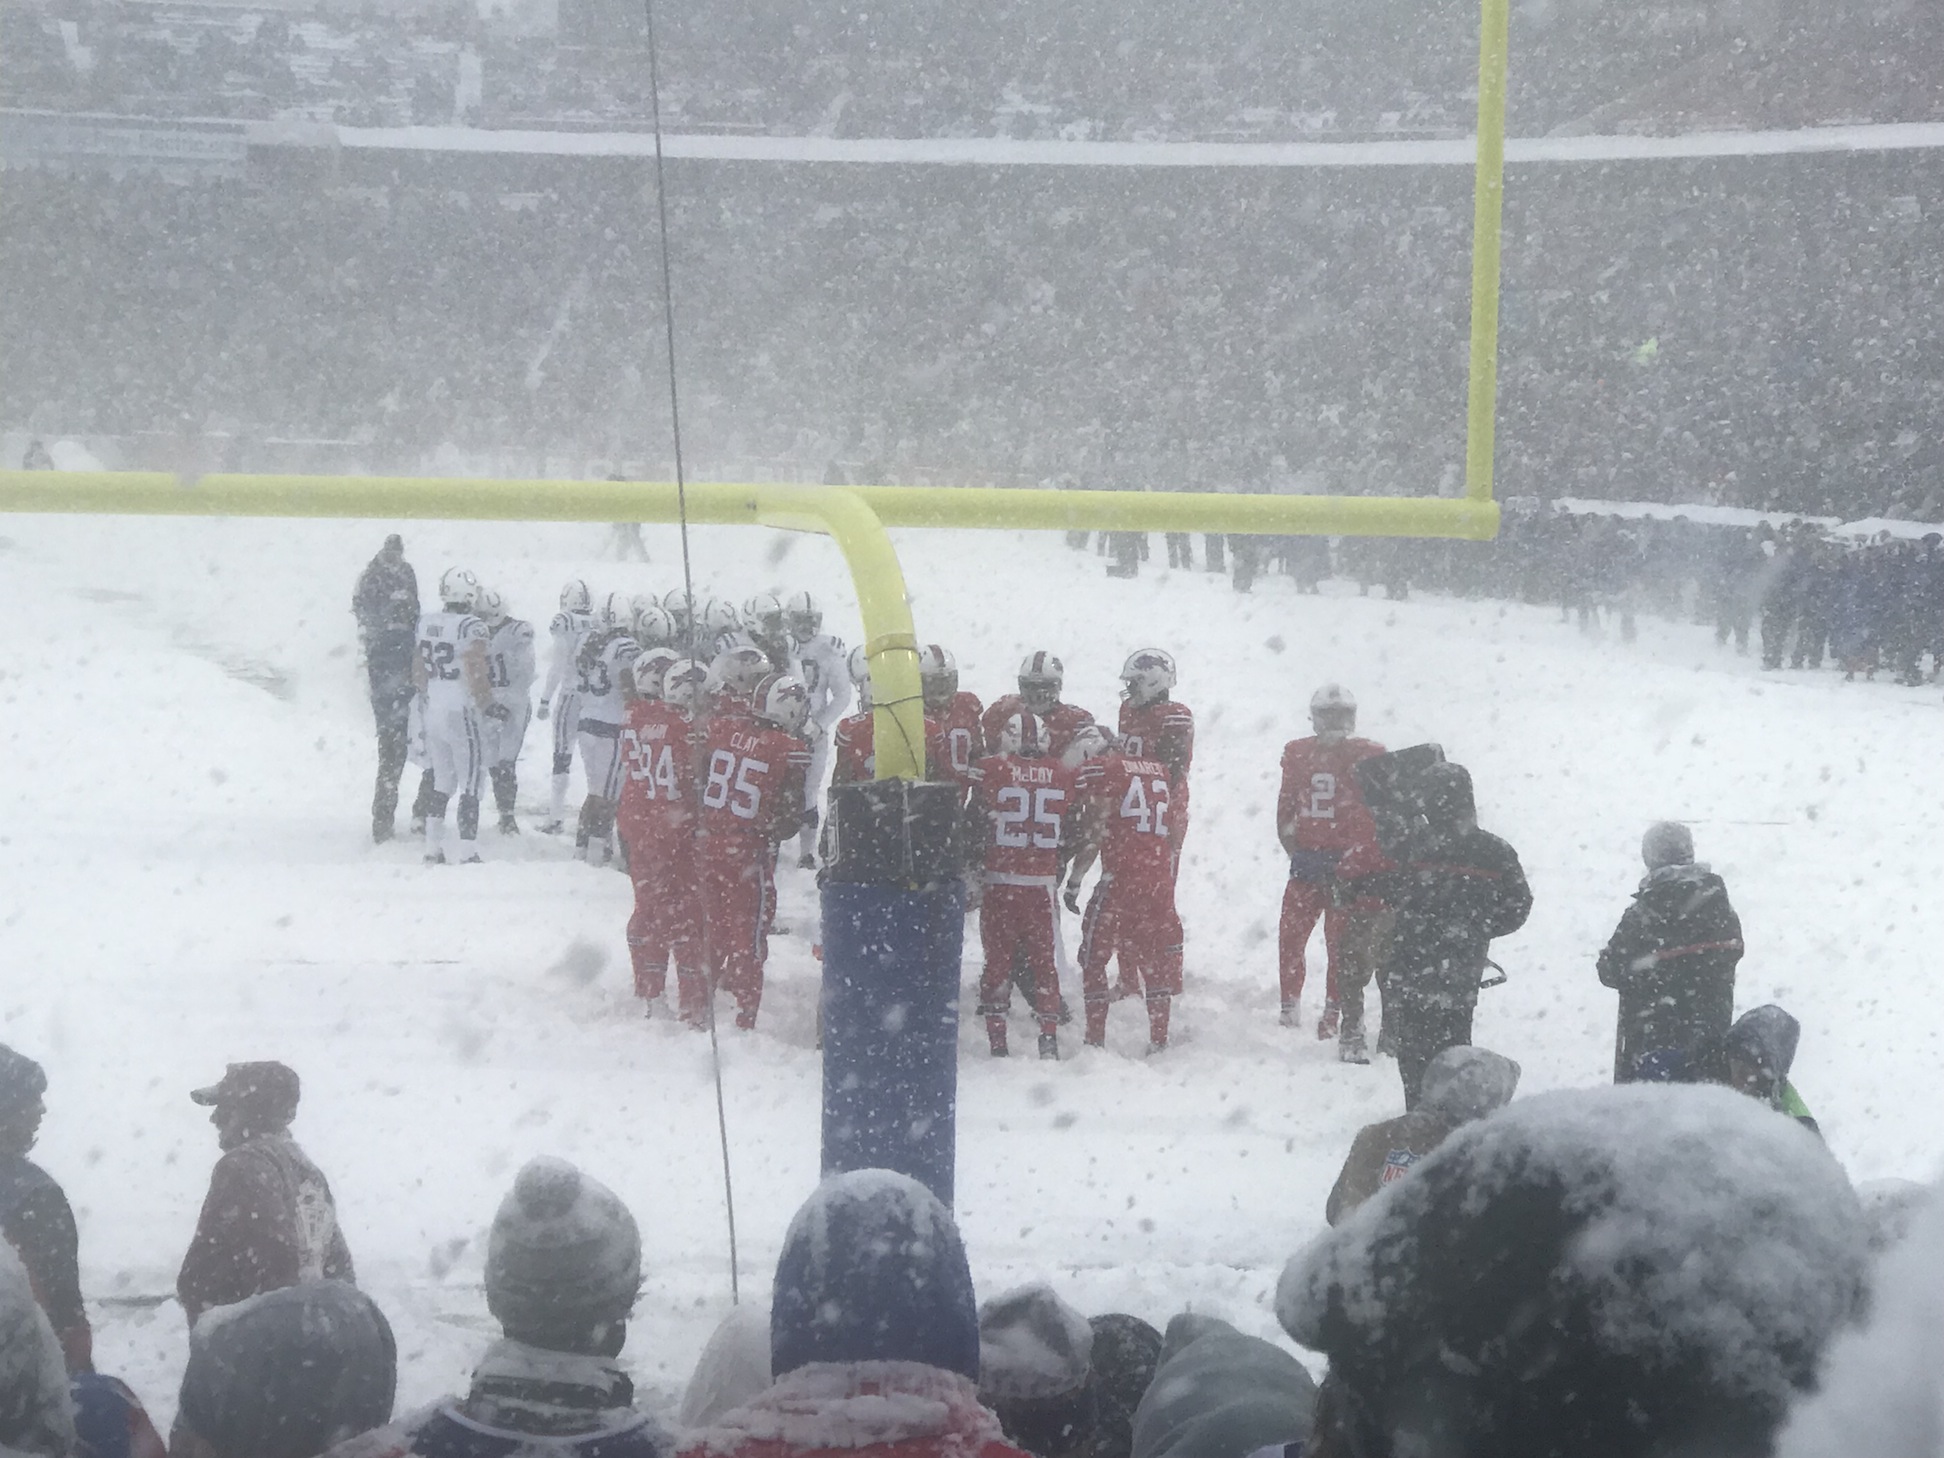 The Bills take the field on a snowy, blizzard like game versus the Indianapolis Colts on Dec. 10. The Bills won the game, 13-7, via a LeSean McCoy rushing touchdown in overtime.